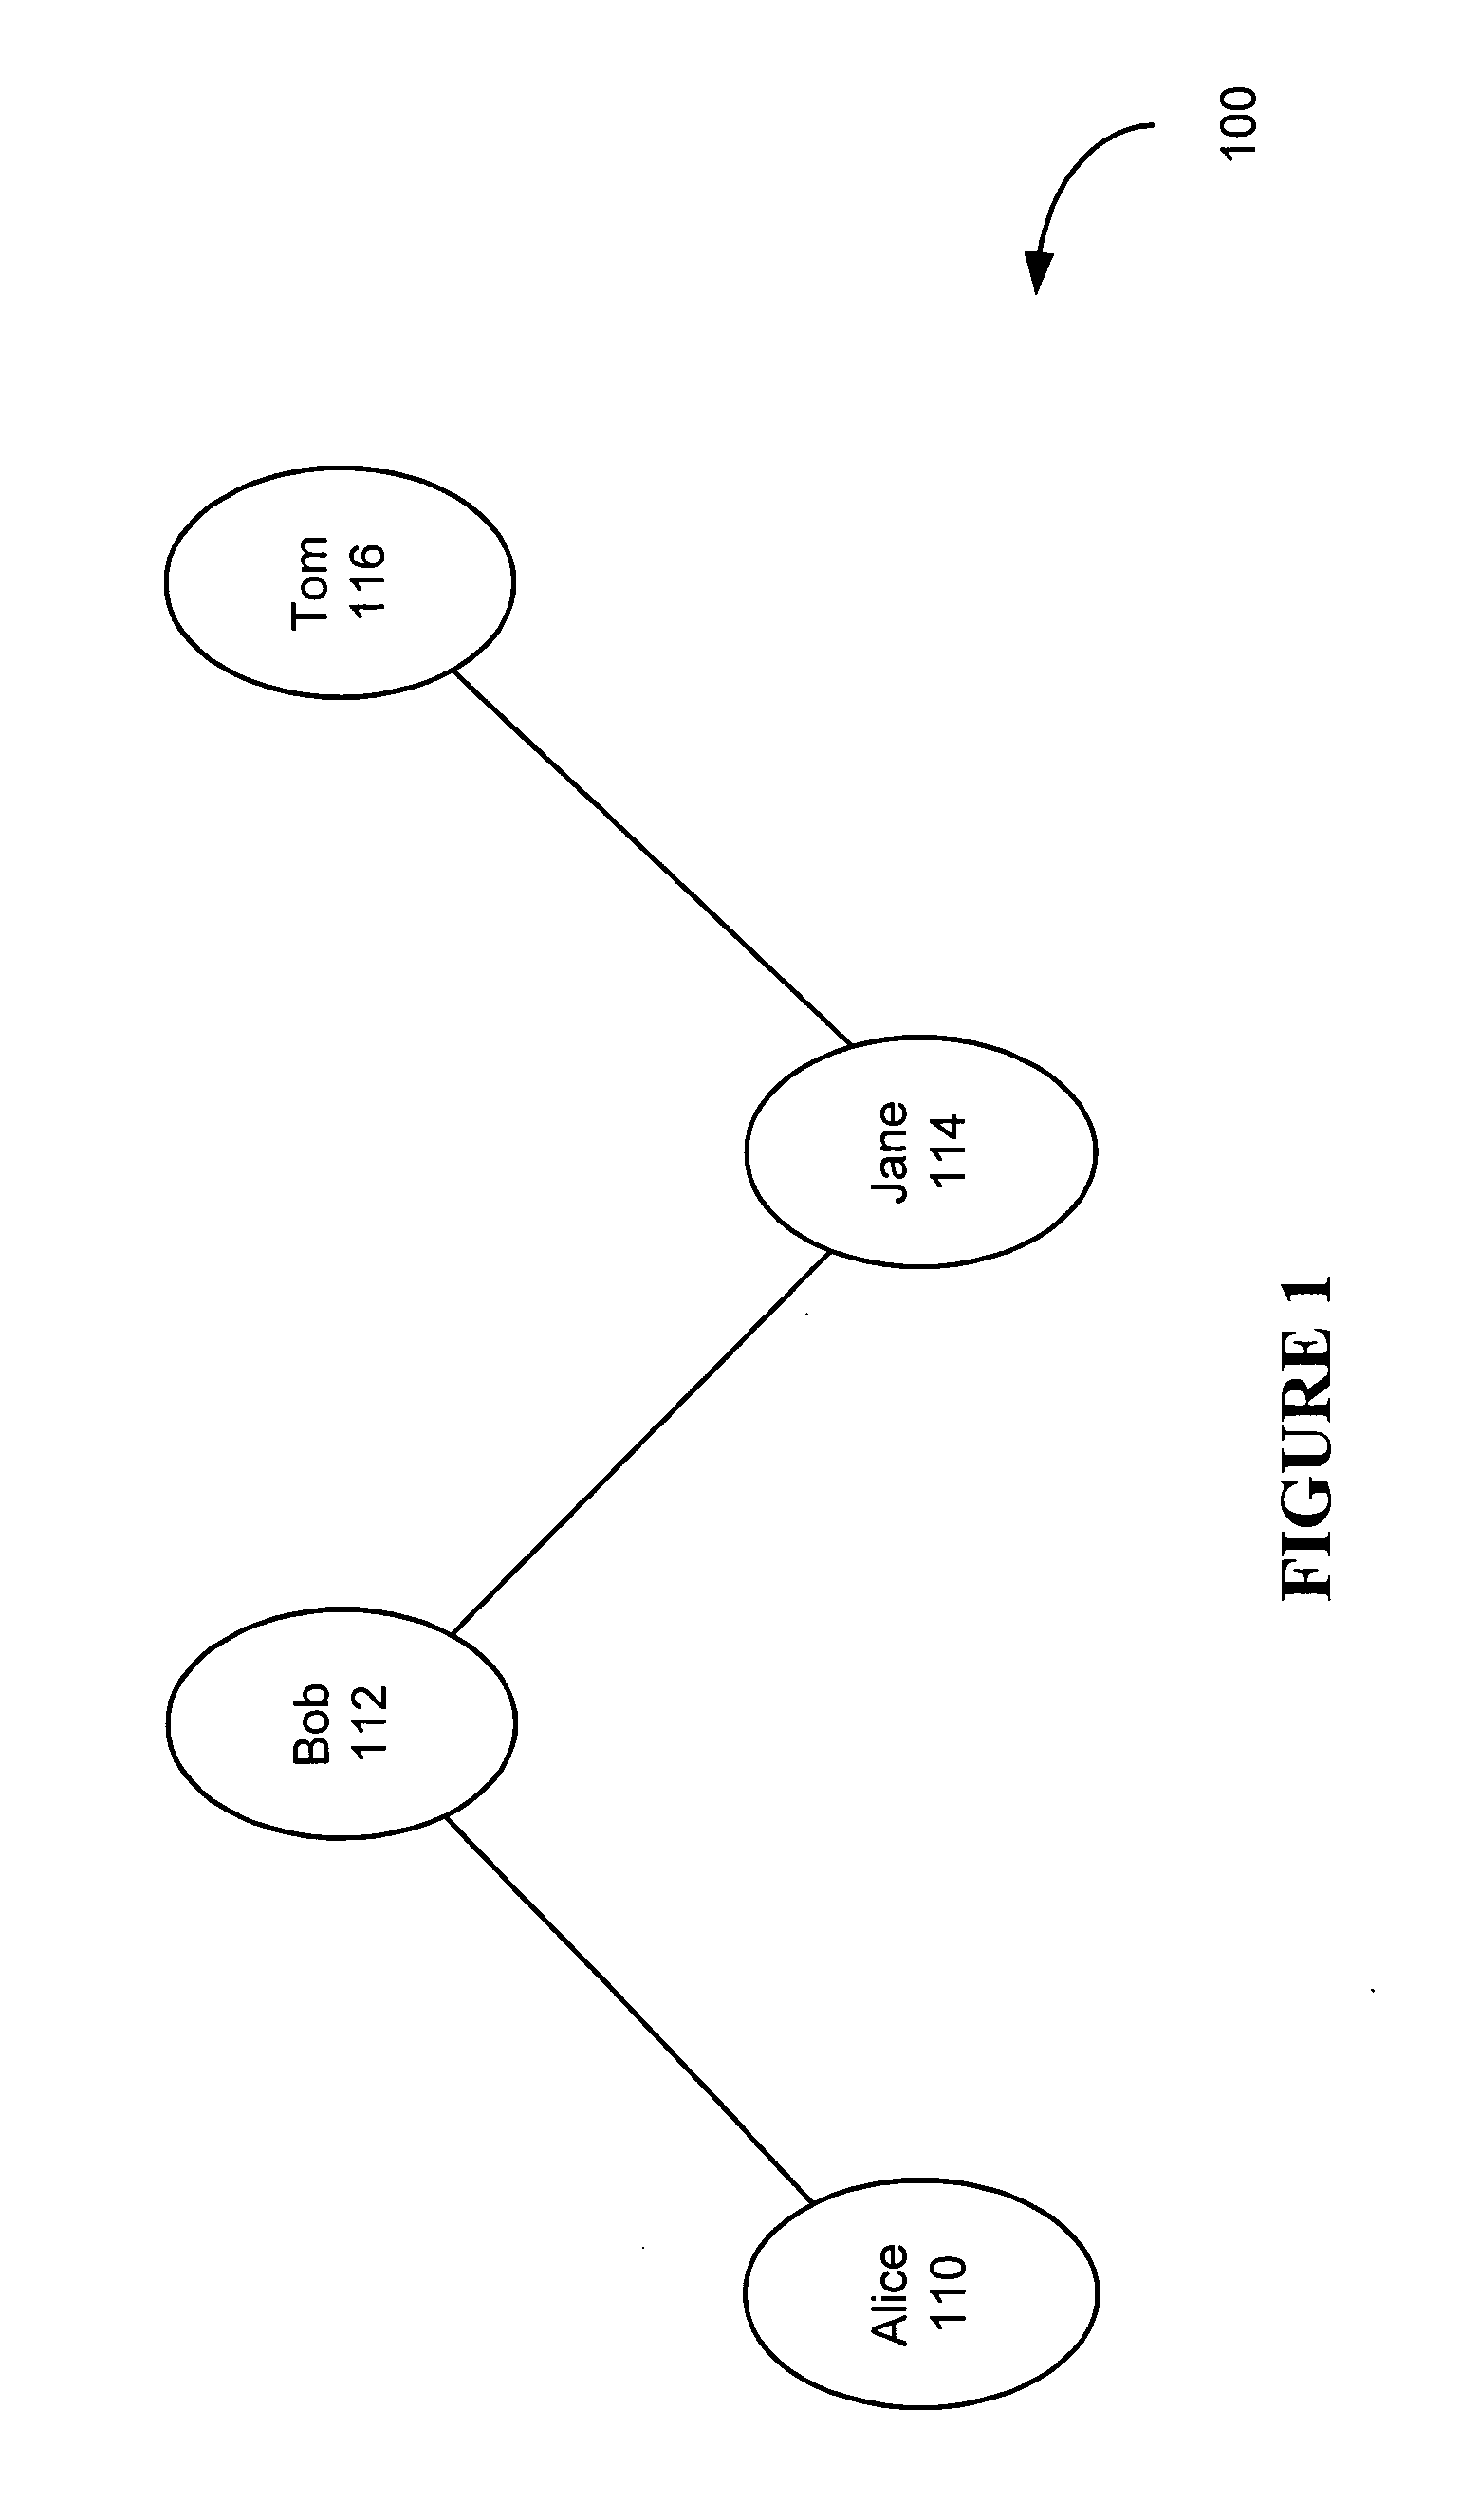 System and method for developing and using trusted policy based on a social model